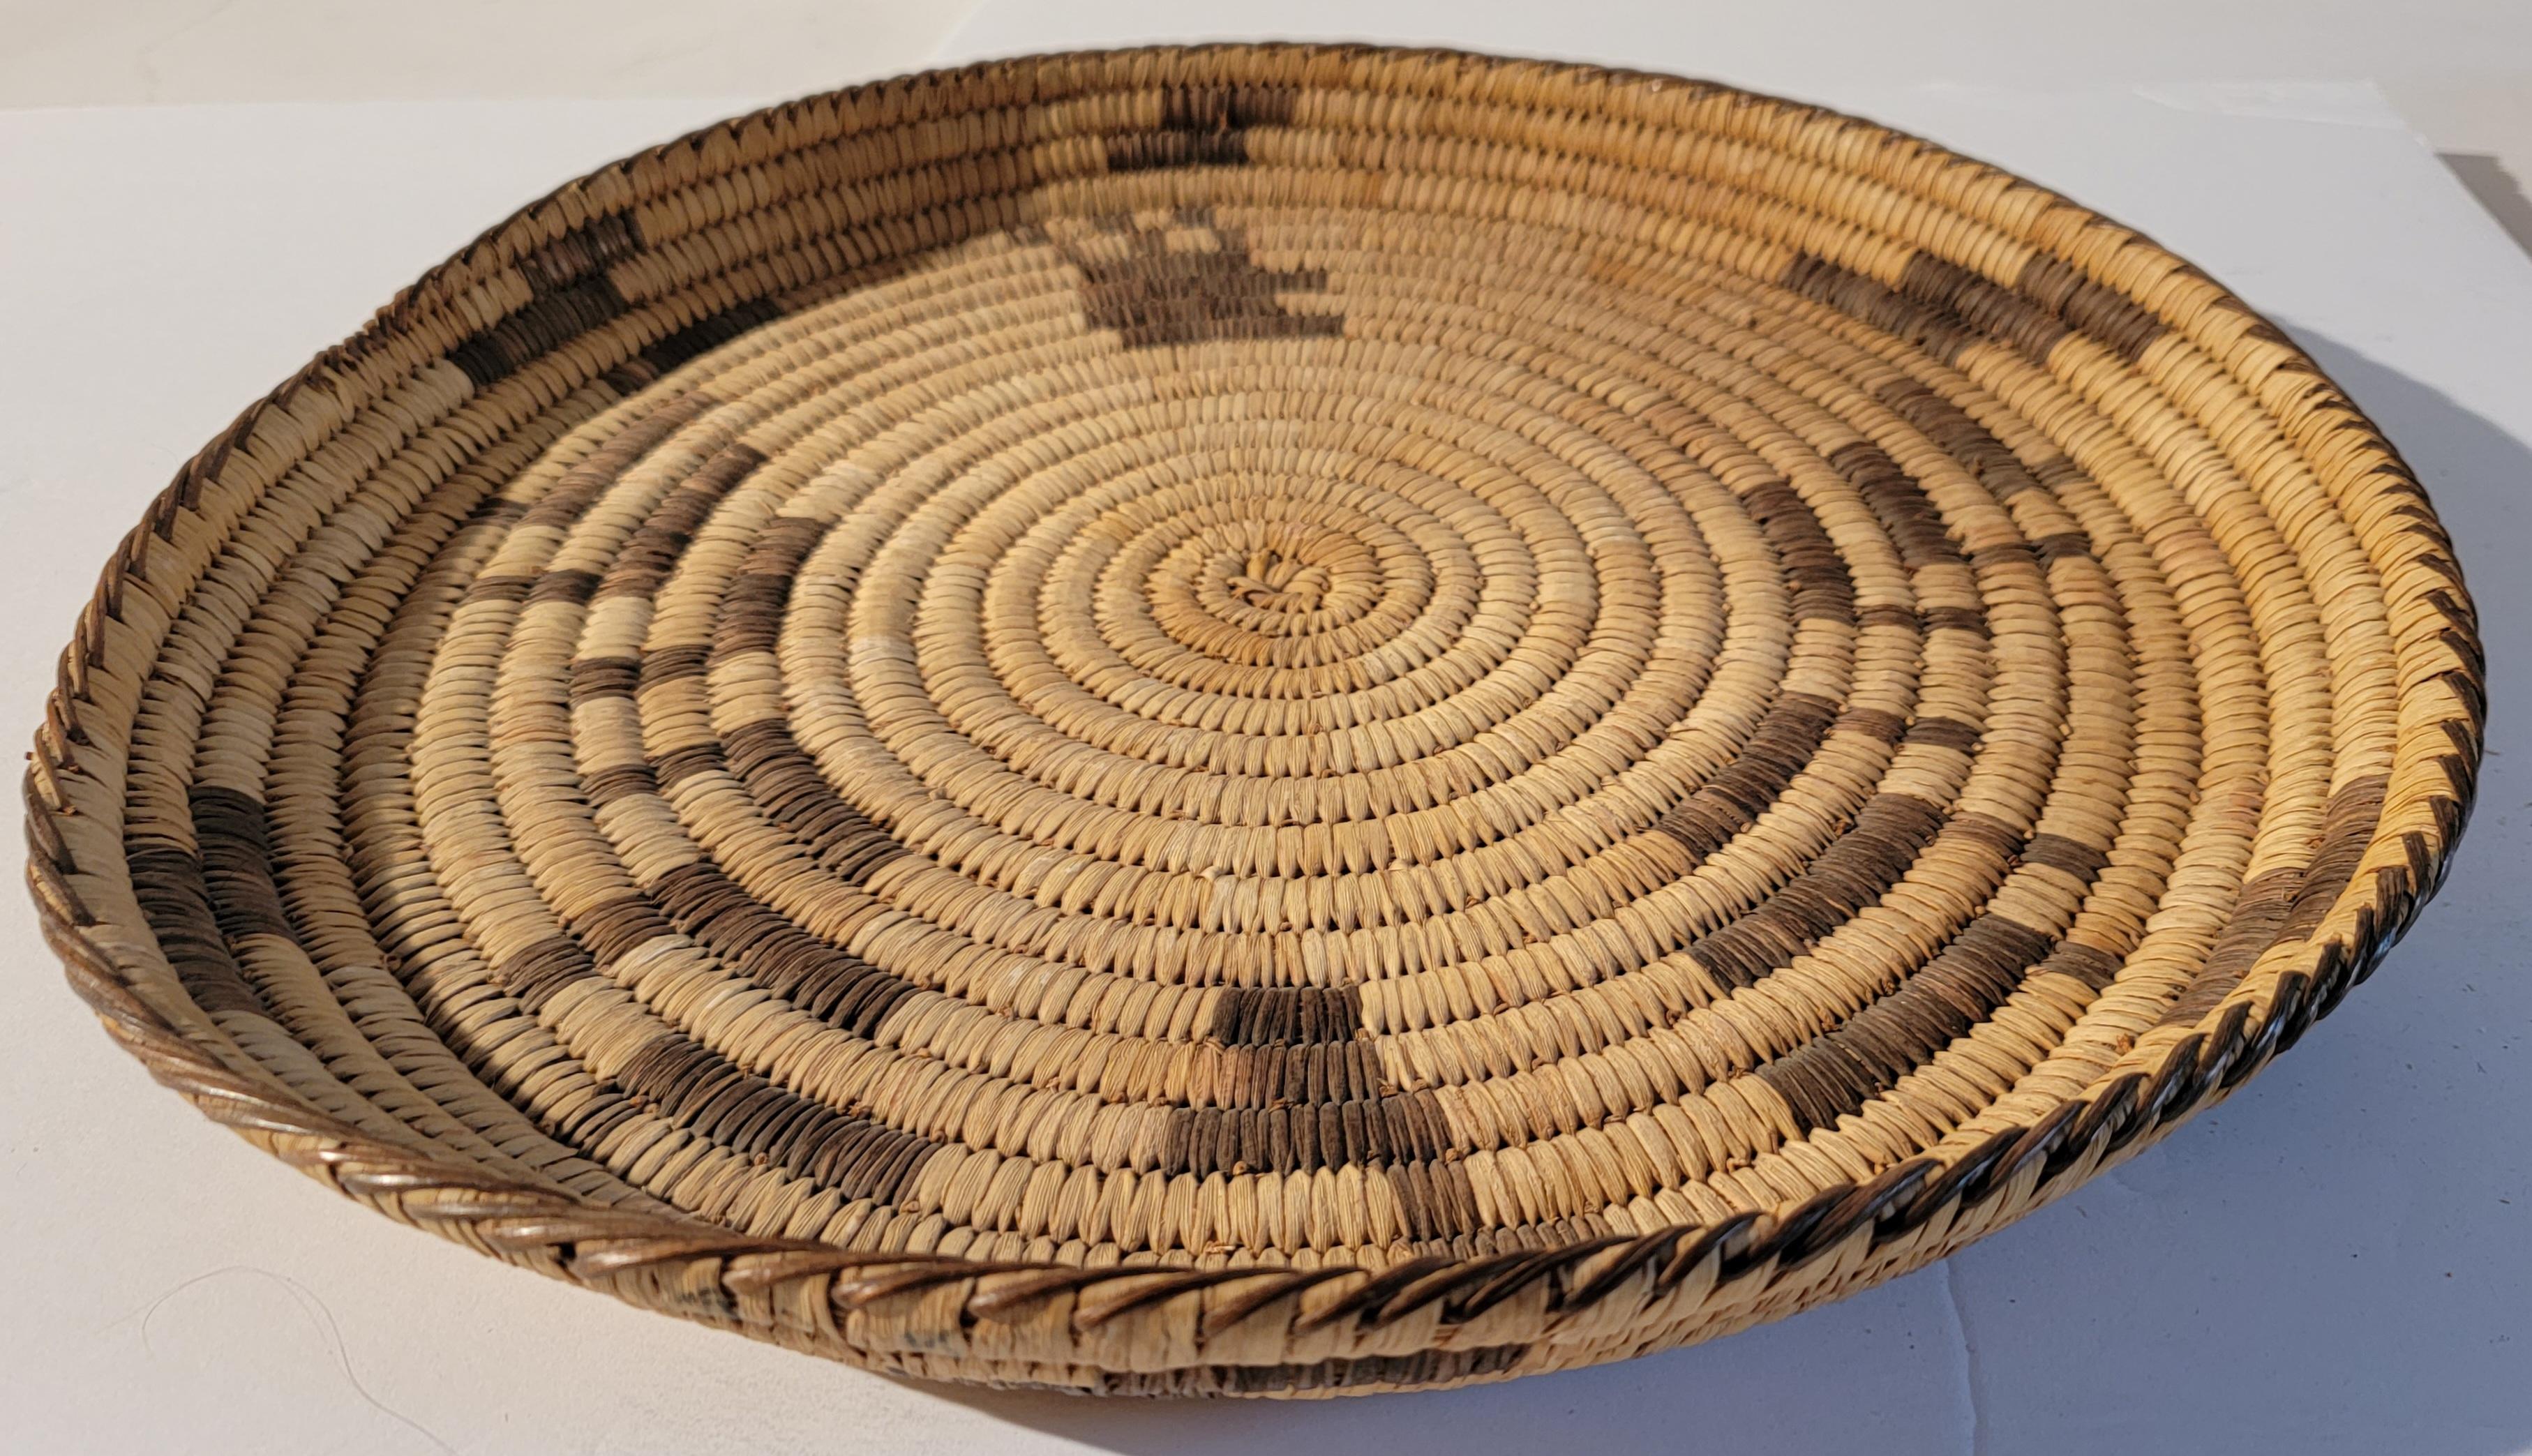 20th C hand woven large Papago Indian tray. Great condition. Great look for Southwestern or cabin decor. Great as as a collection on a shelf or table.